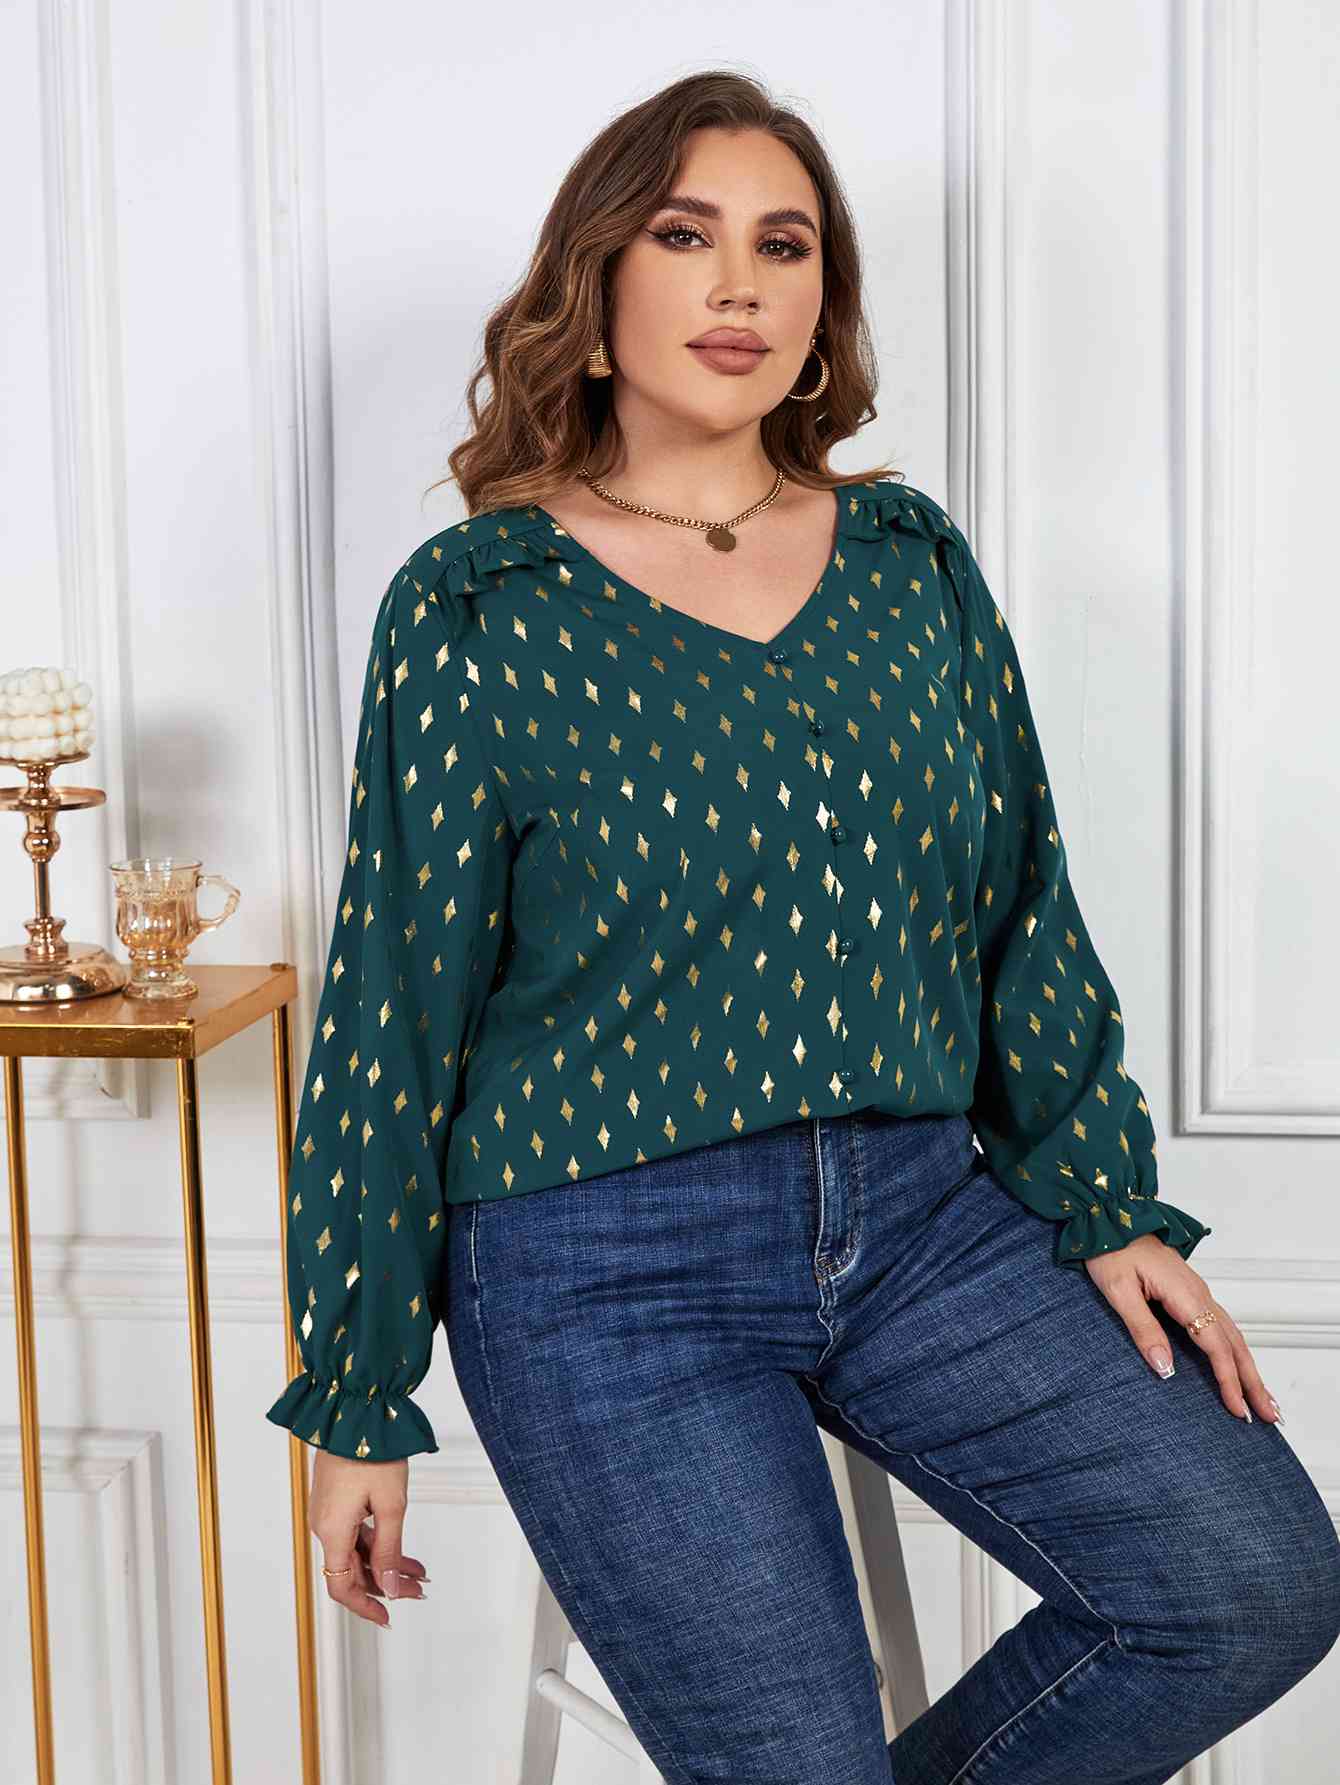 Melo Apparel Plus Size Printed Frill Trim Flounce Sleeve Blouse - lolaluxeshop